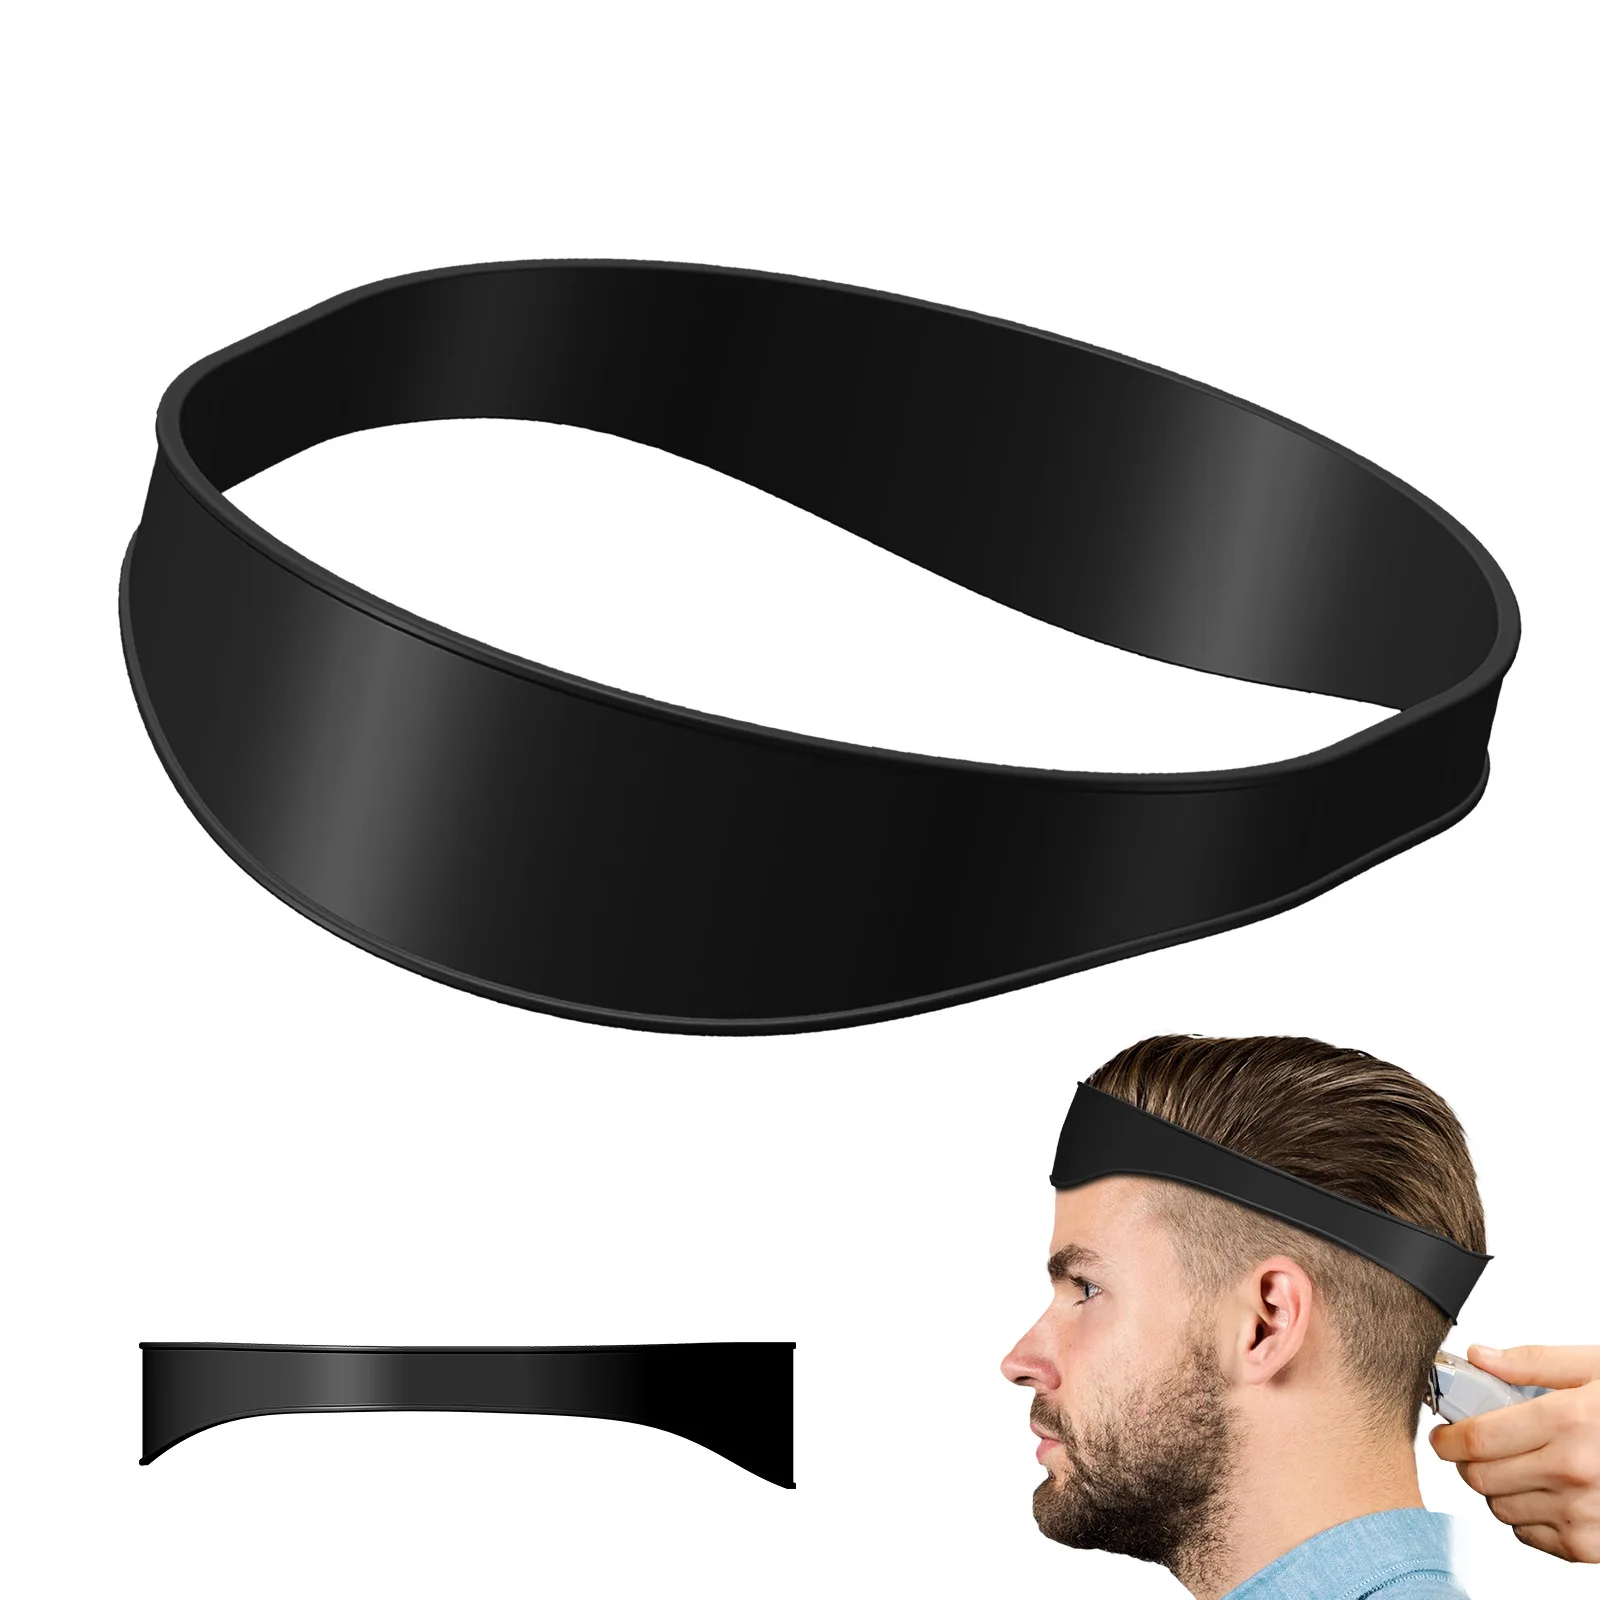 

Curved Silicone Neckline Haircut Band For DIY Home Trimming Hair Neck Guide Headband Hair Salon Styler Barber Hairdressing Tools